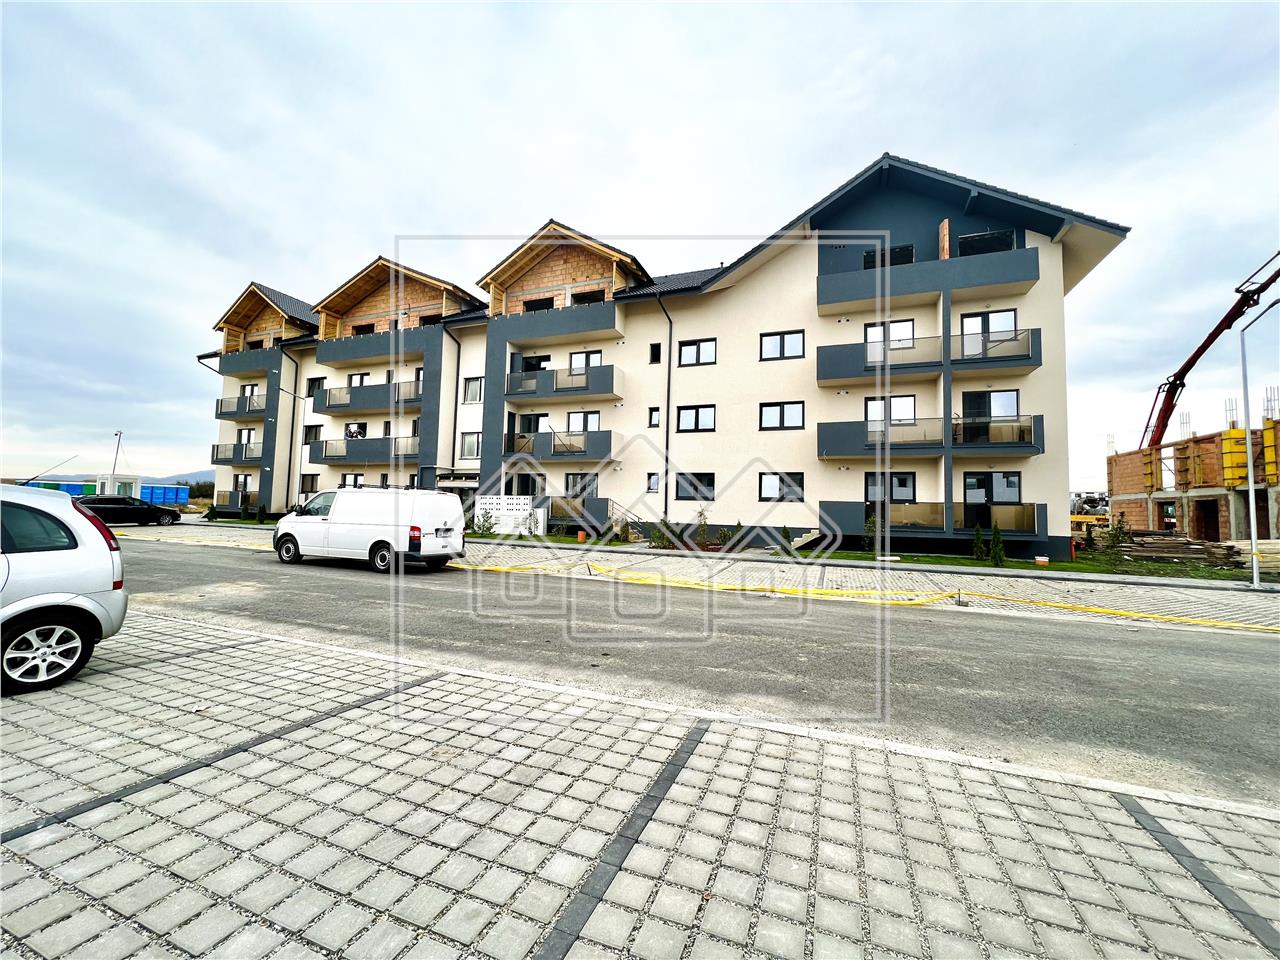 Apartment for sale in Sibiu - completely detached - Dna Stanca area